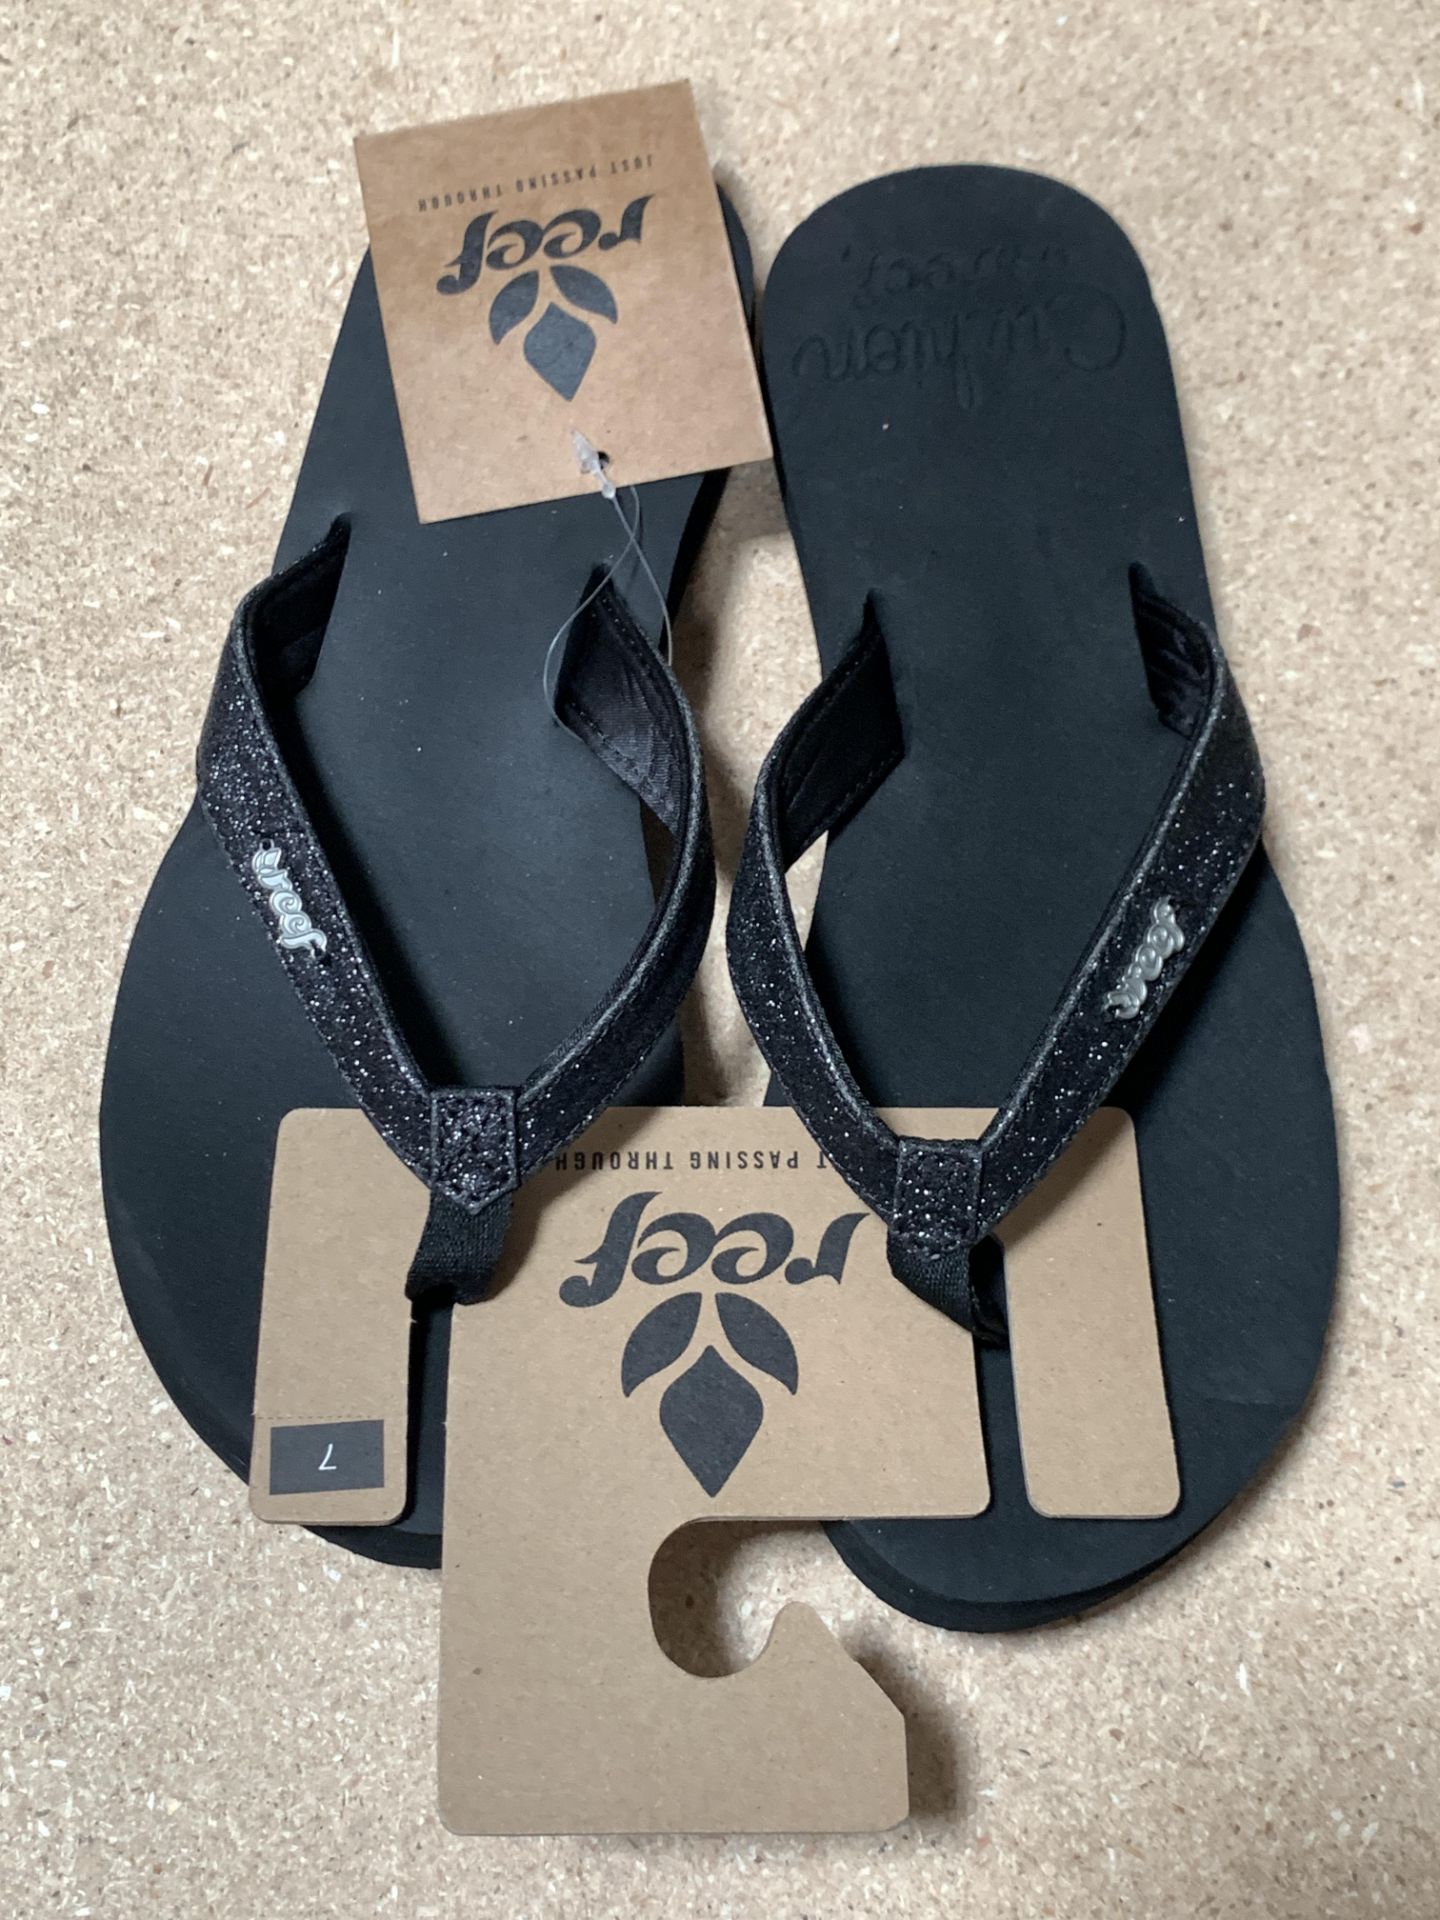 6 Pairs REEF Flip Flop Sandals, Star Cushion Black, New w. Tags, Various Sizes (Retail $282) - Image 3 of 5